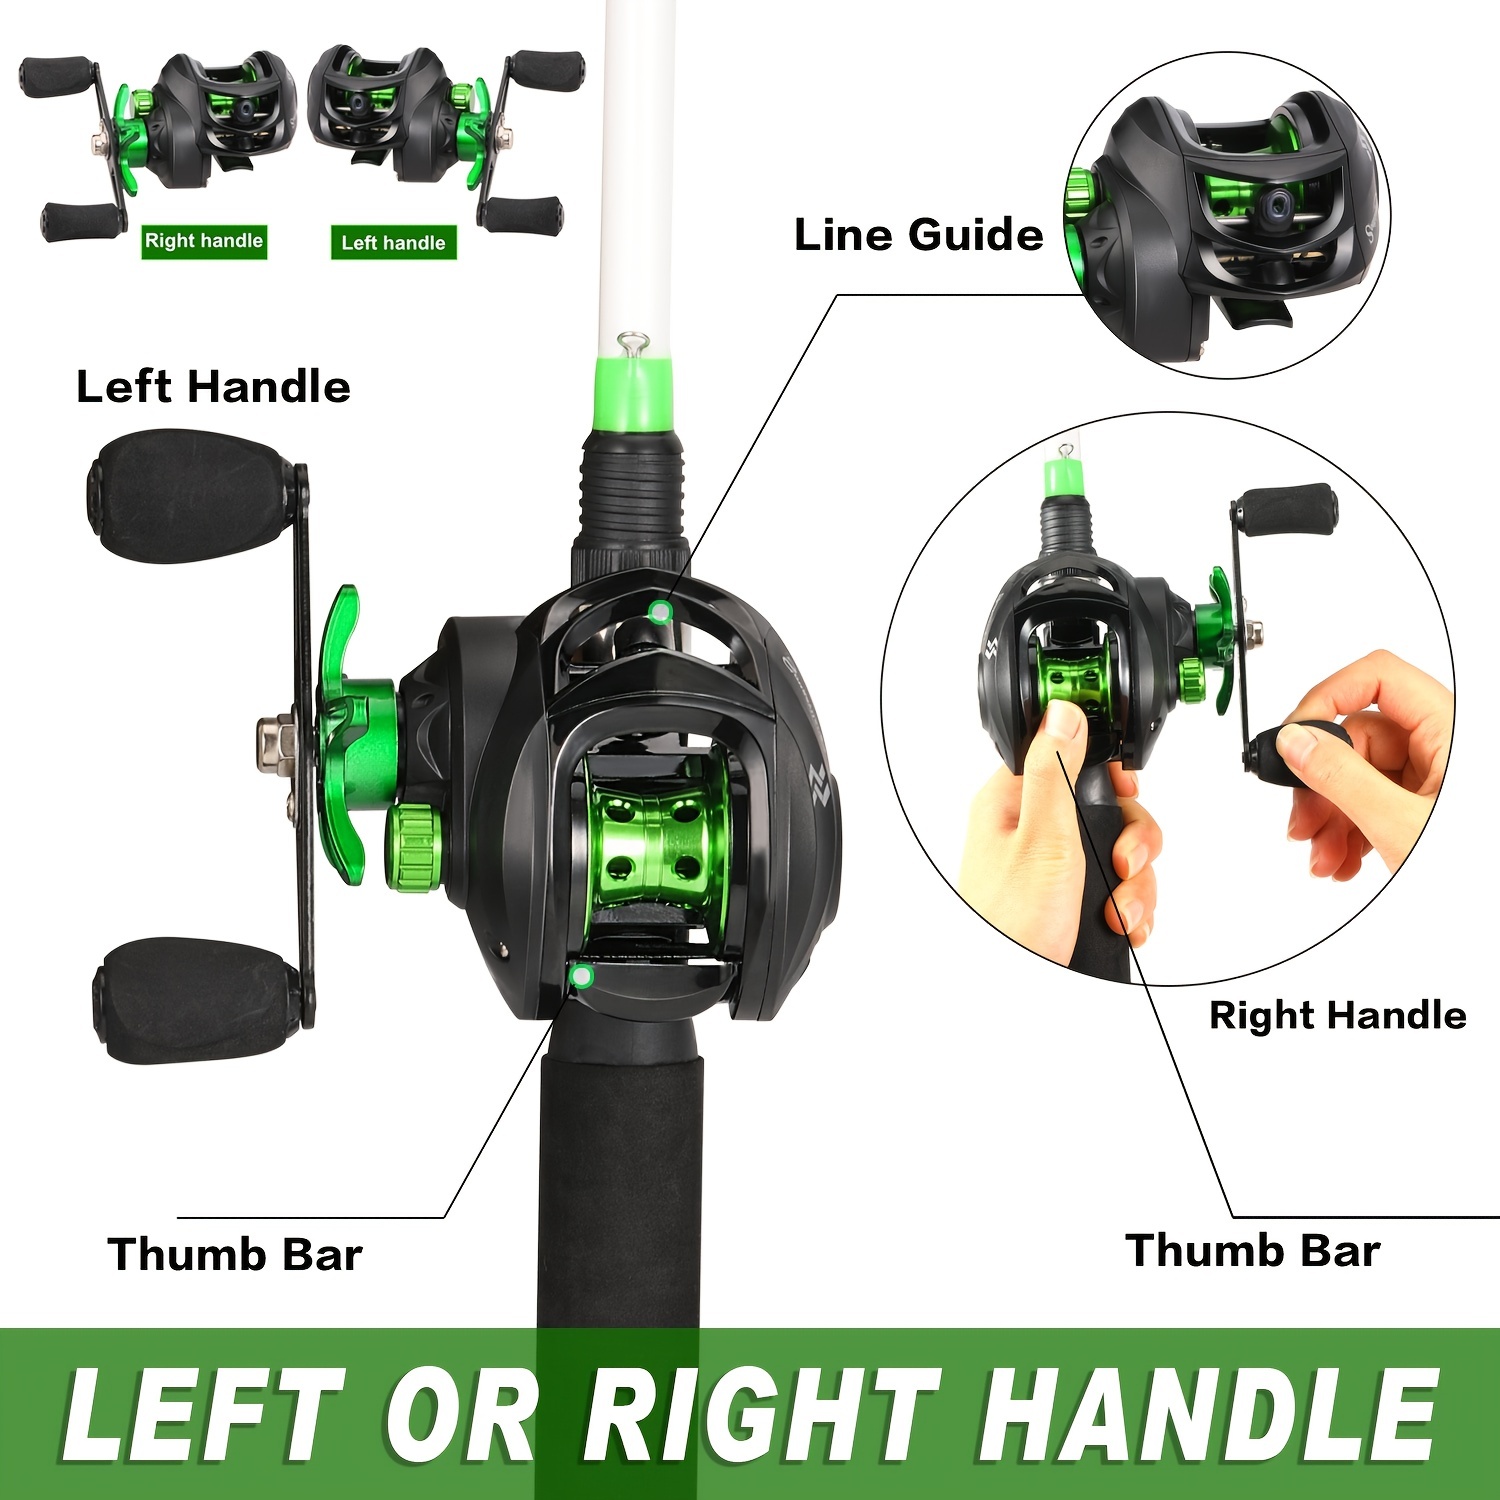 Sougayilang Fishing Baitcasting Reels 7.3:1 Gear Ratio with Magnetic Braking System Fishing Reels, Size: Left Hand, Green